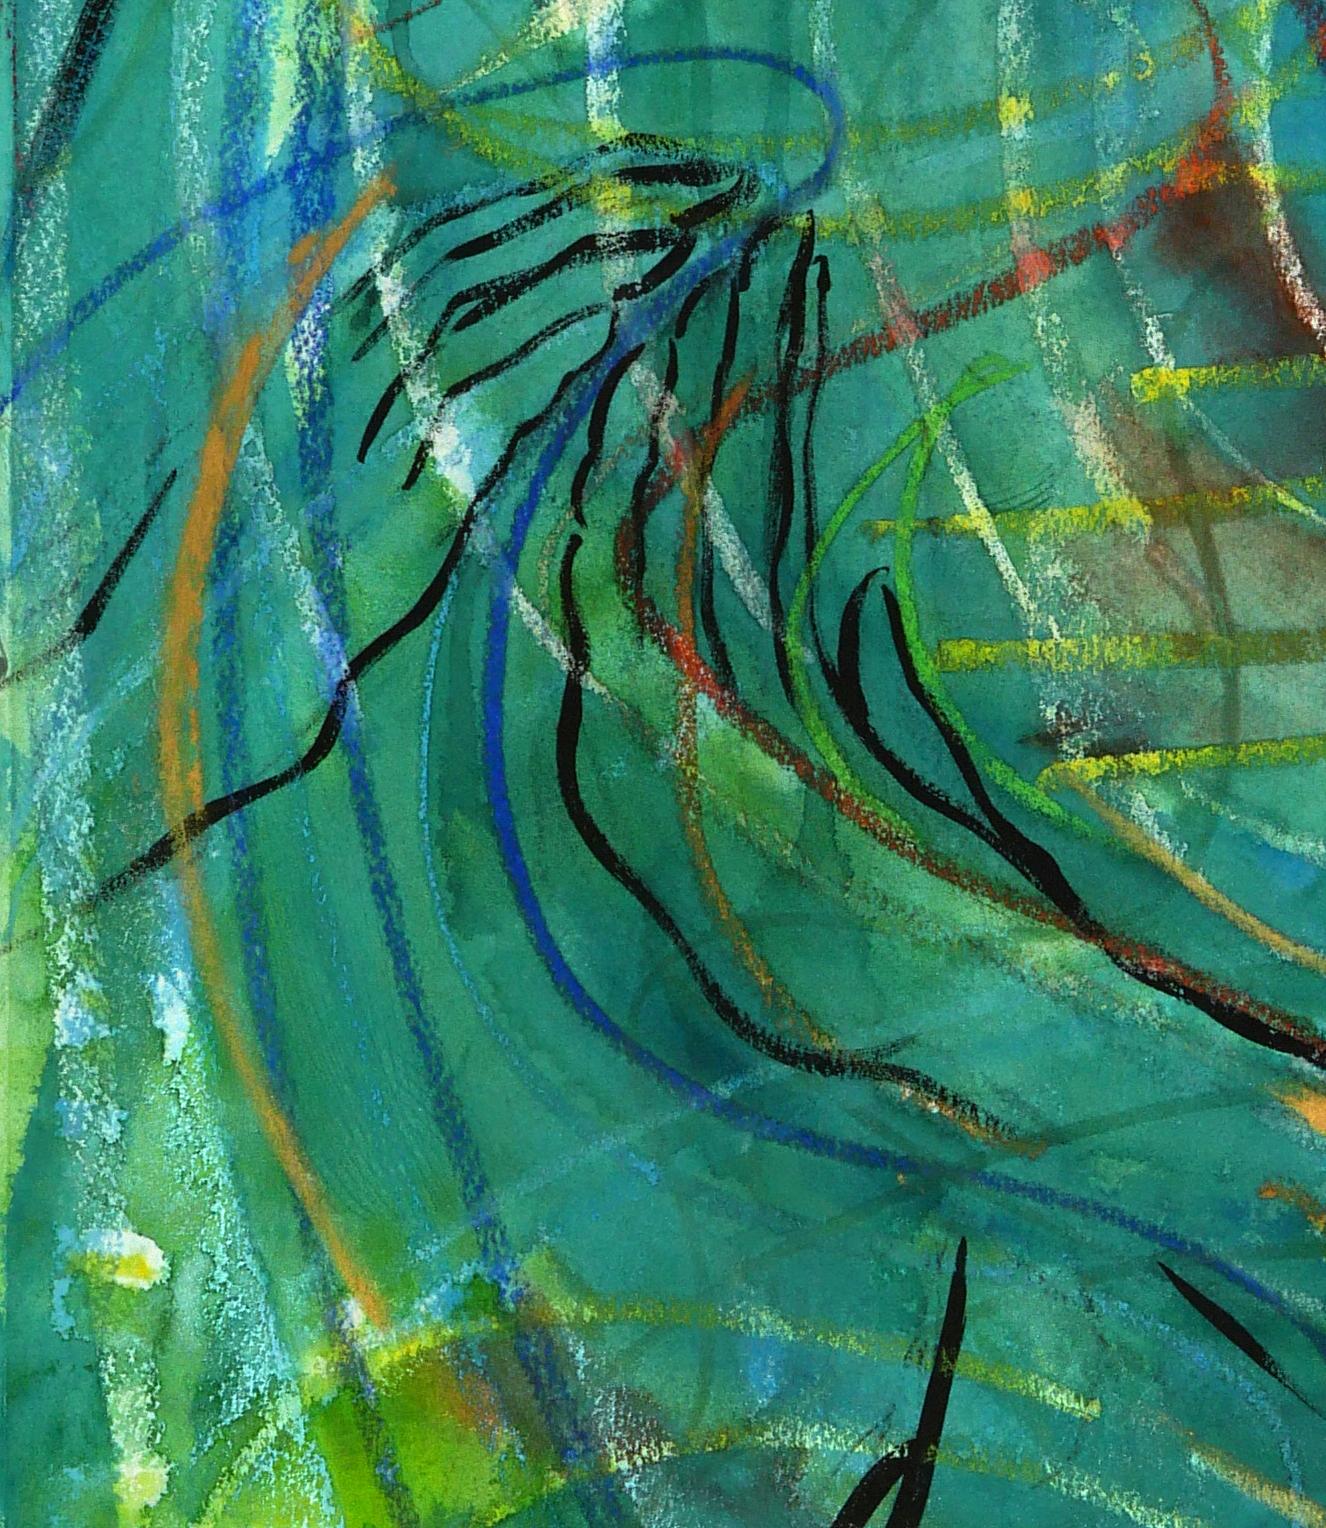 Stringer, colorful green figurative abstraction - Expressionist Painting by Janet Morgan